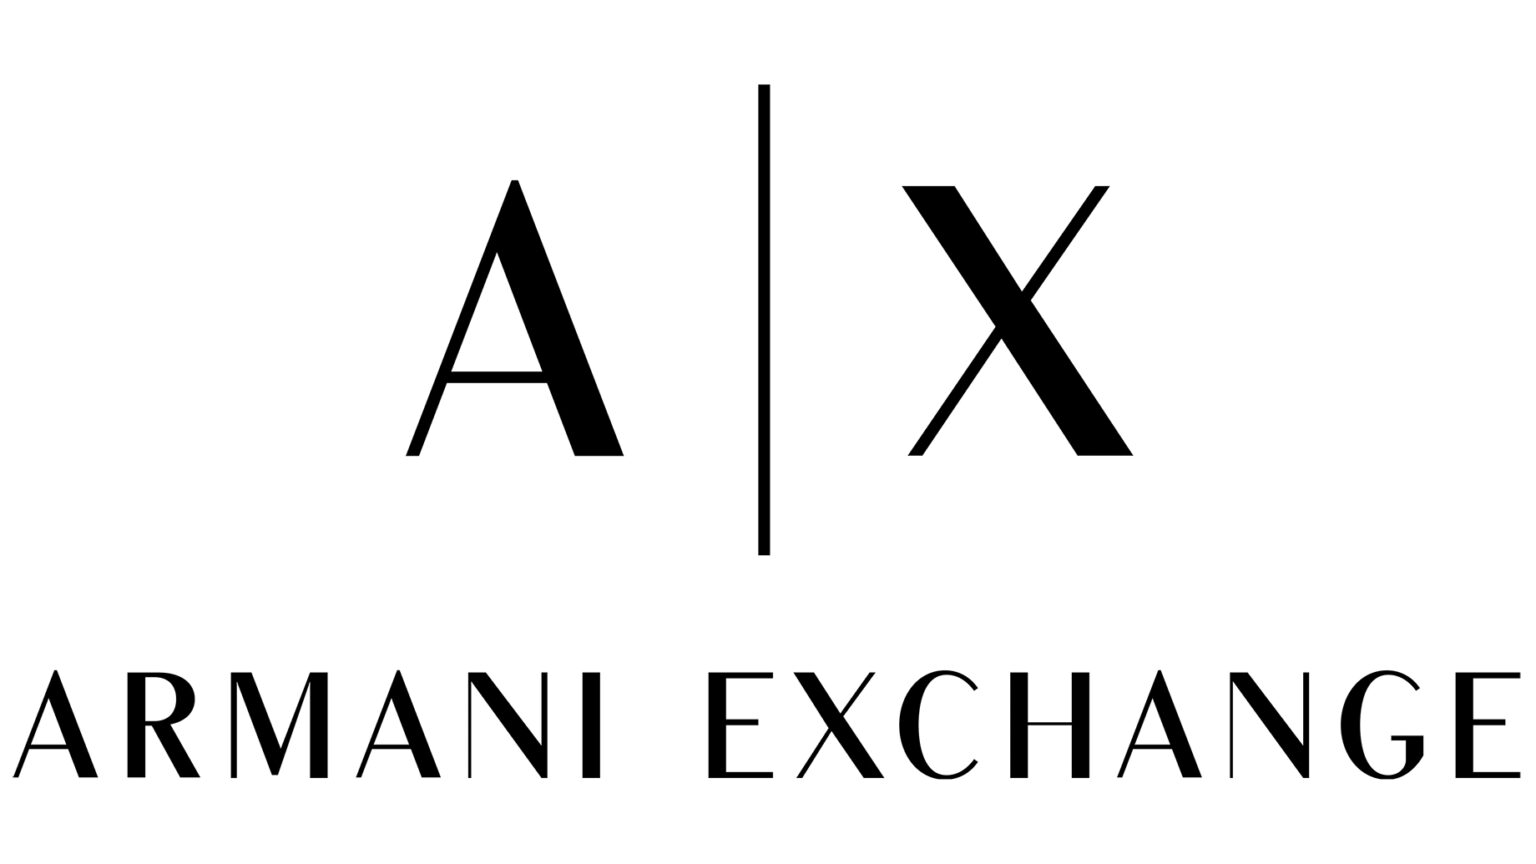 Armani Exchange Color Codes - HTML Hex, RGB and CMYK Color Codes